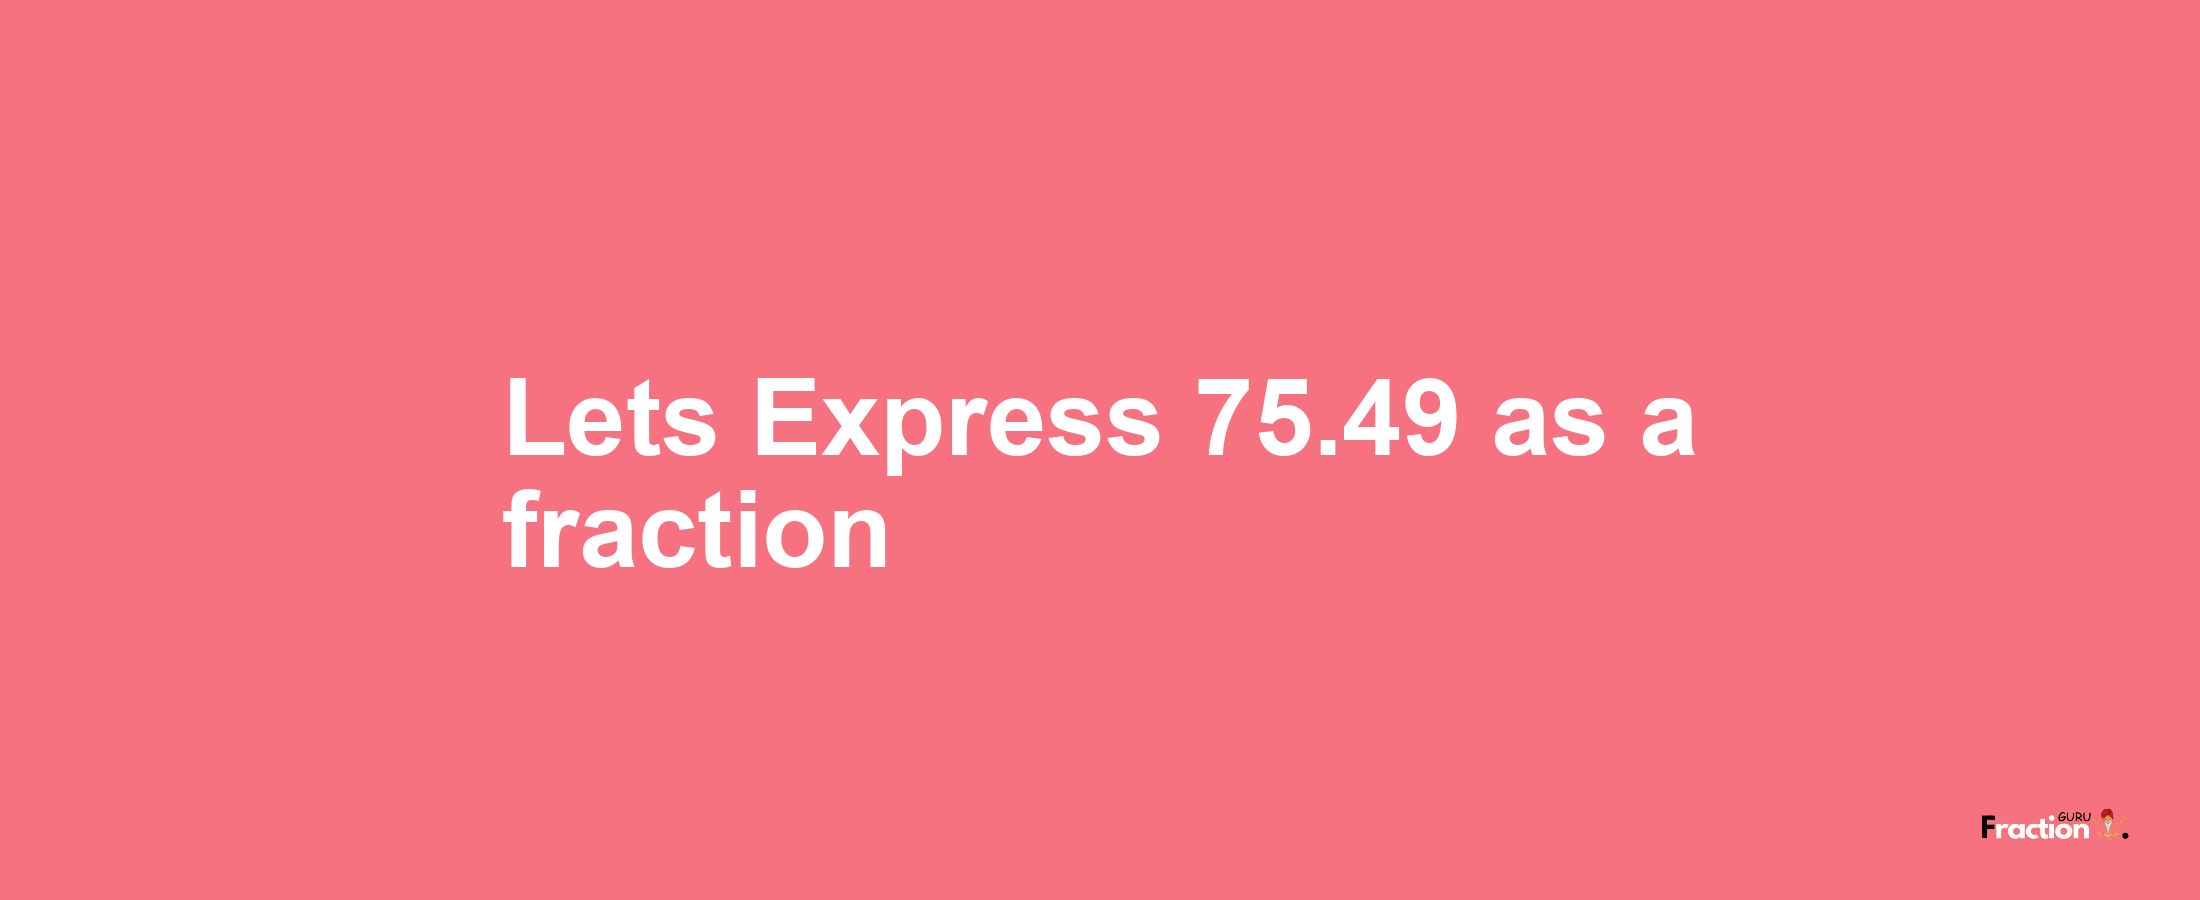 Lets Express 75.49 as afraction